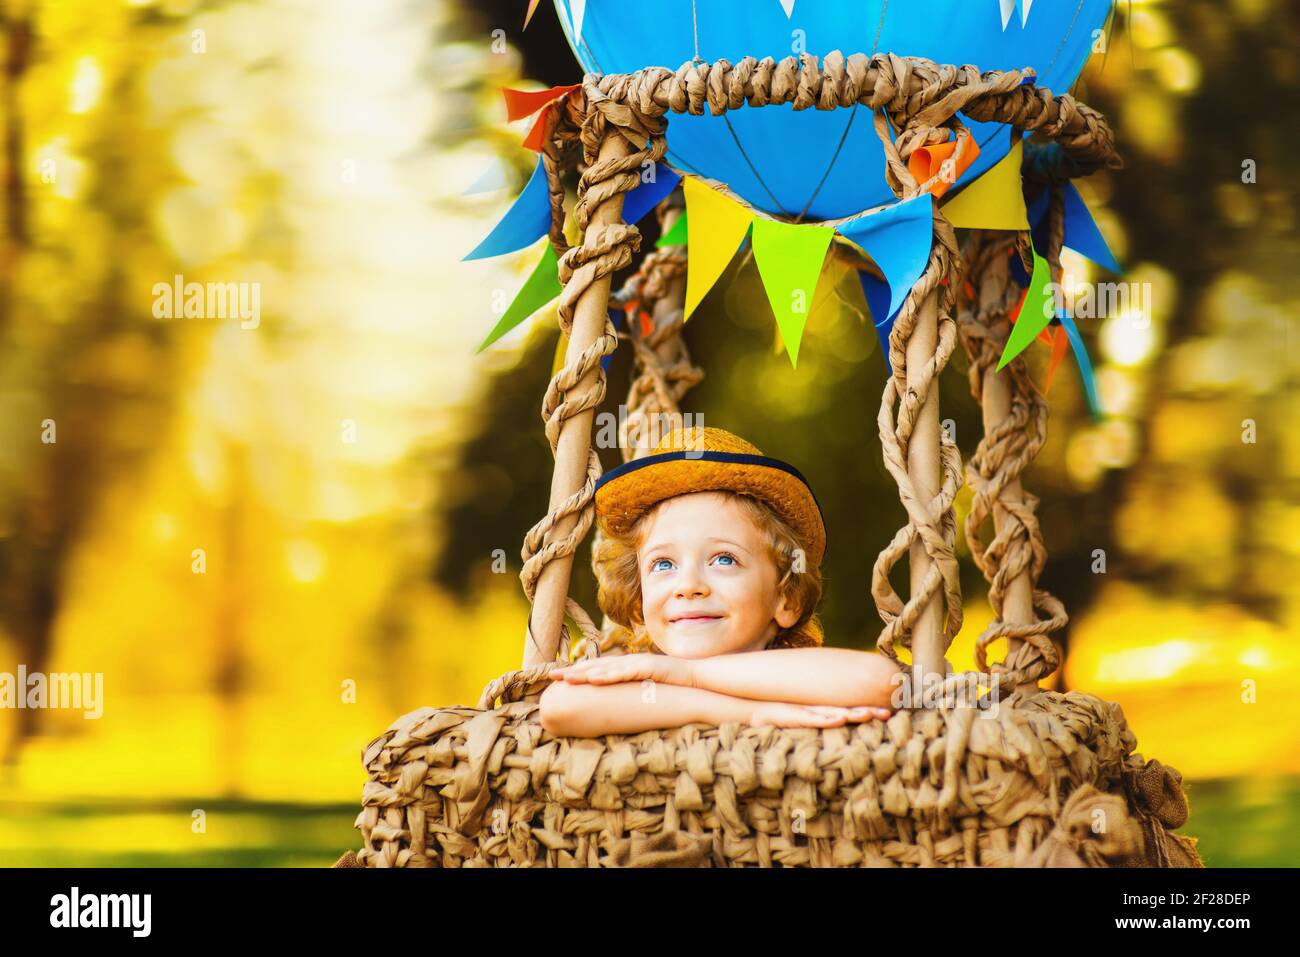 Little curly-haired boy in the air dreaming looks into the sky. Baby in a balloon basket. Stock Photo